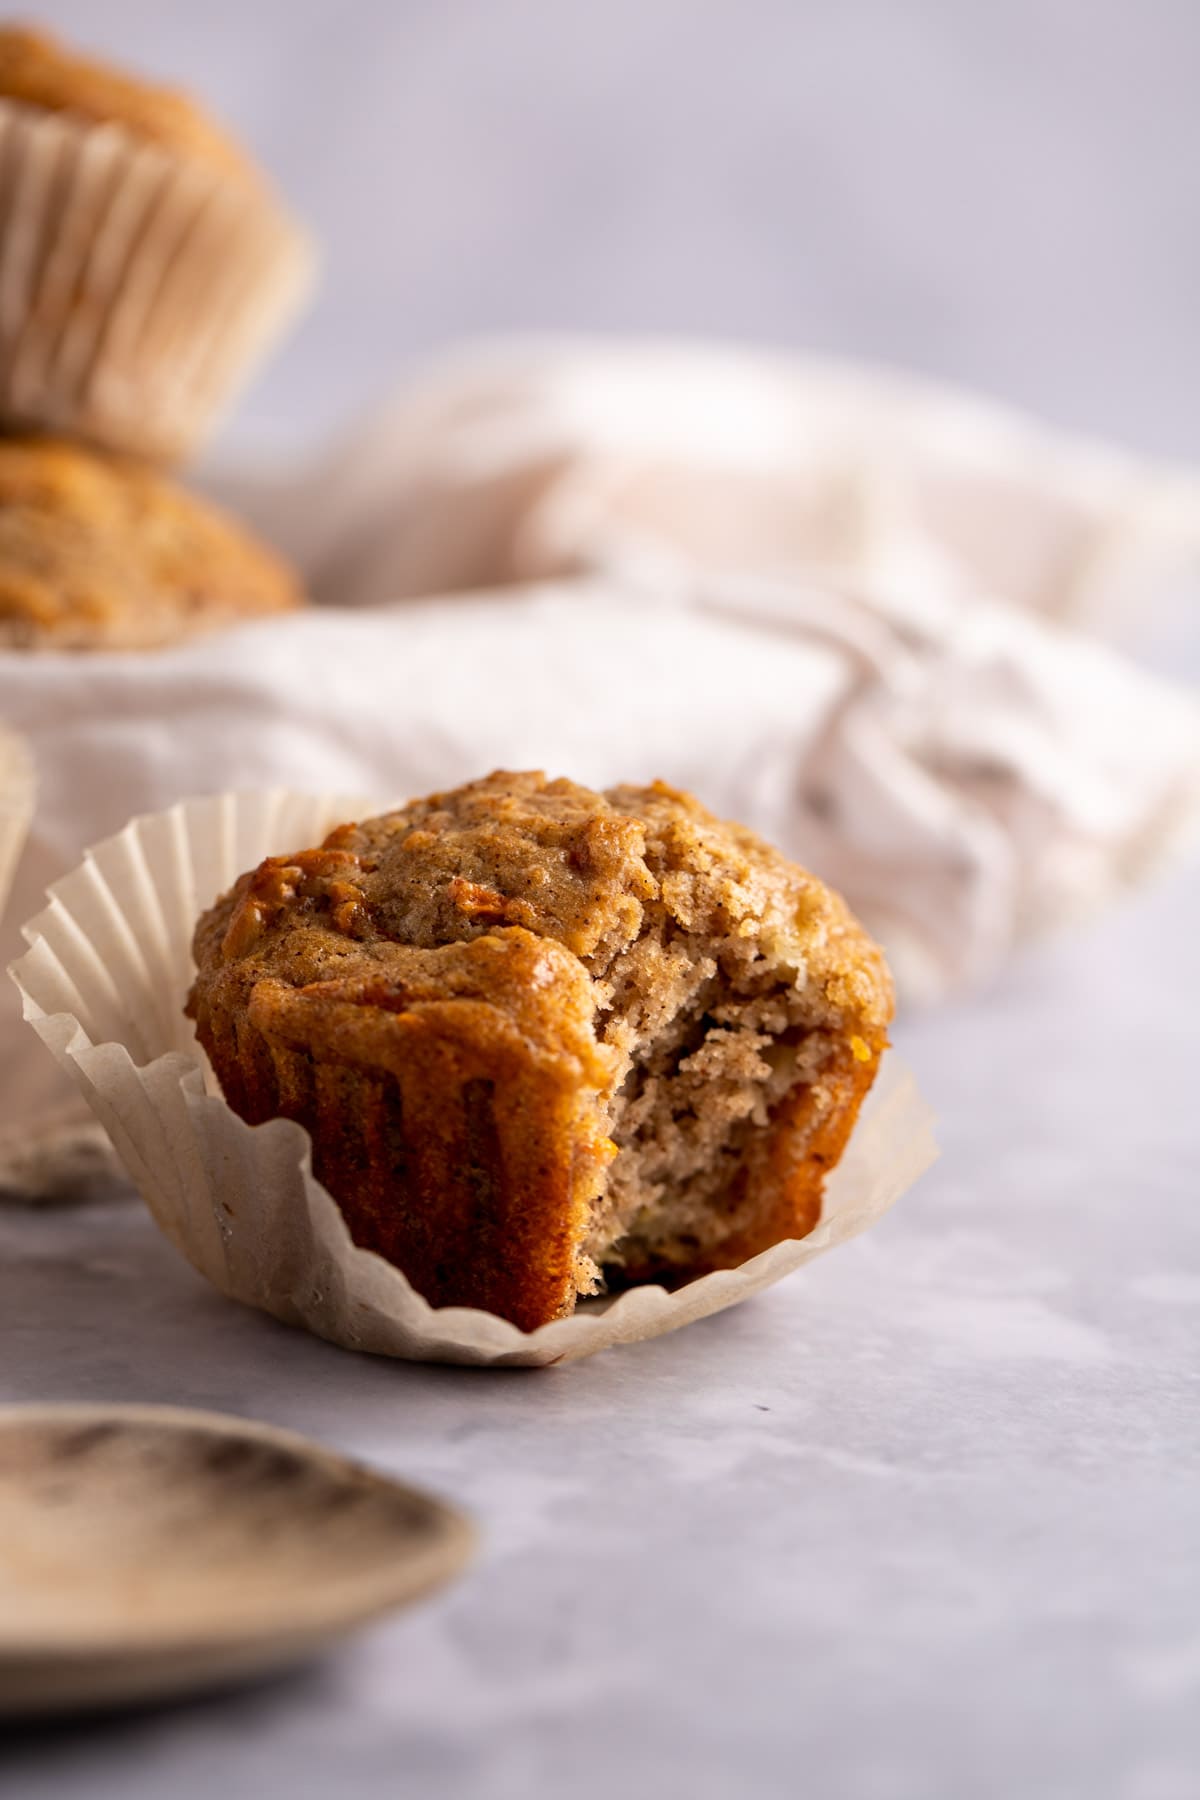 A single banana carrot muffin with a bite missing, with its muffin liner peeled away, sitting on a grey table.